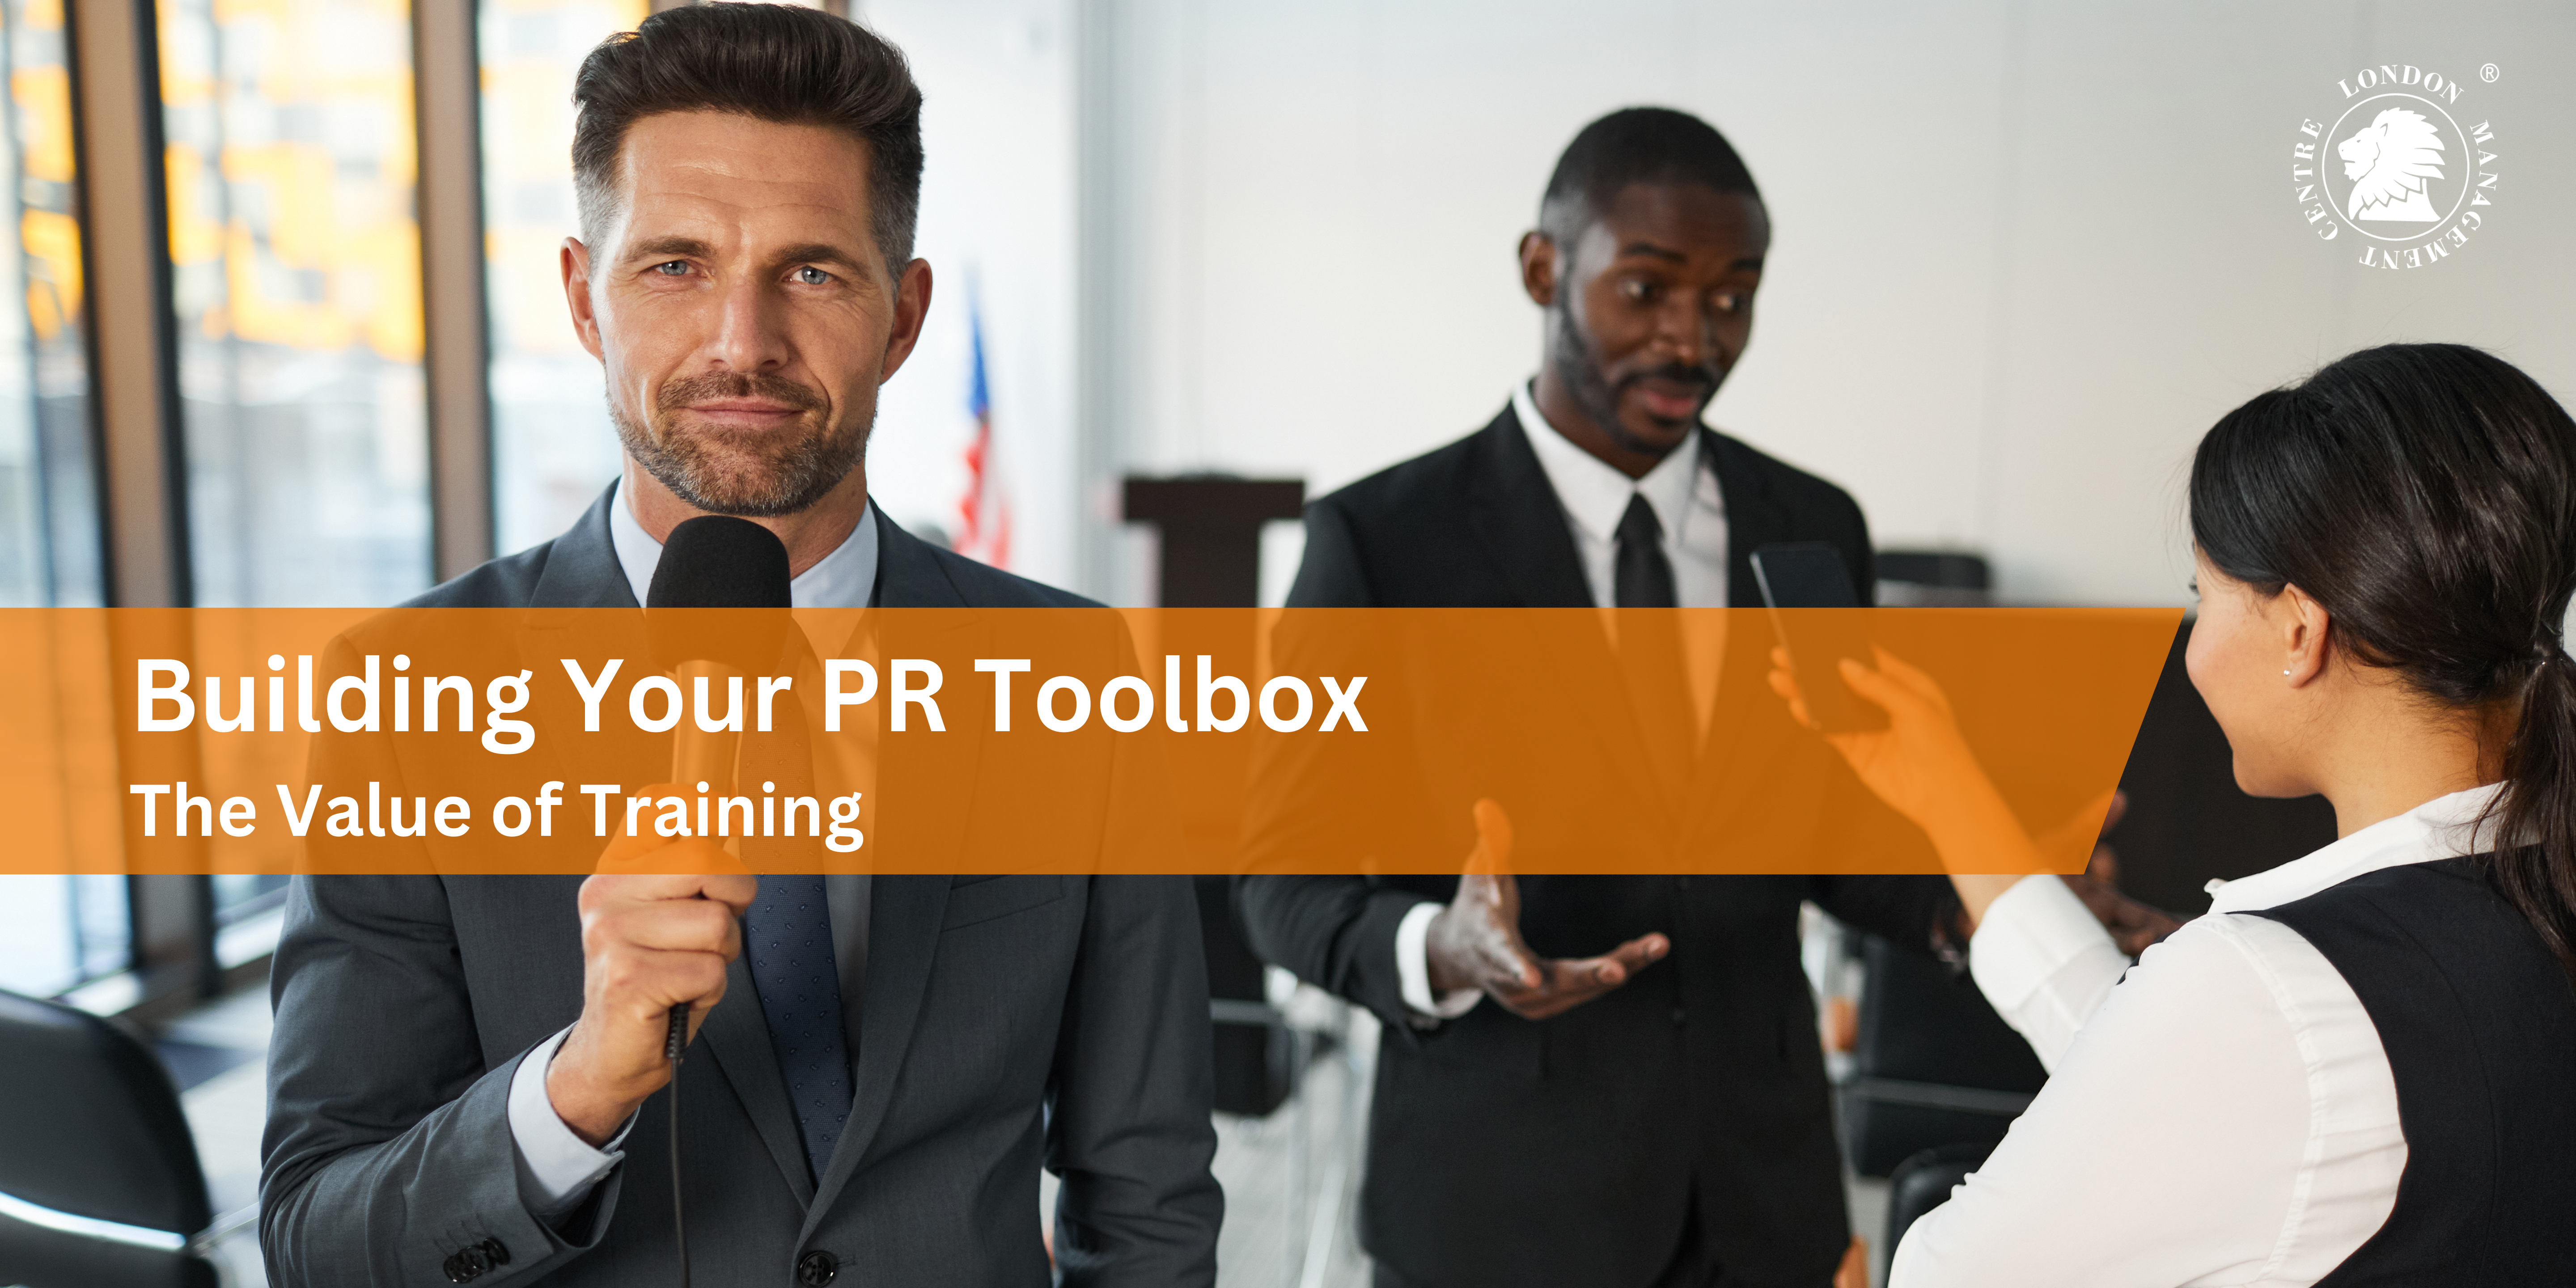 Building Your PR Toolbox: The Value of Training